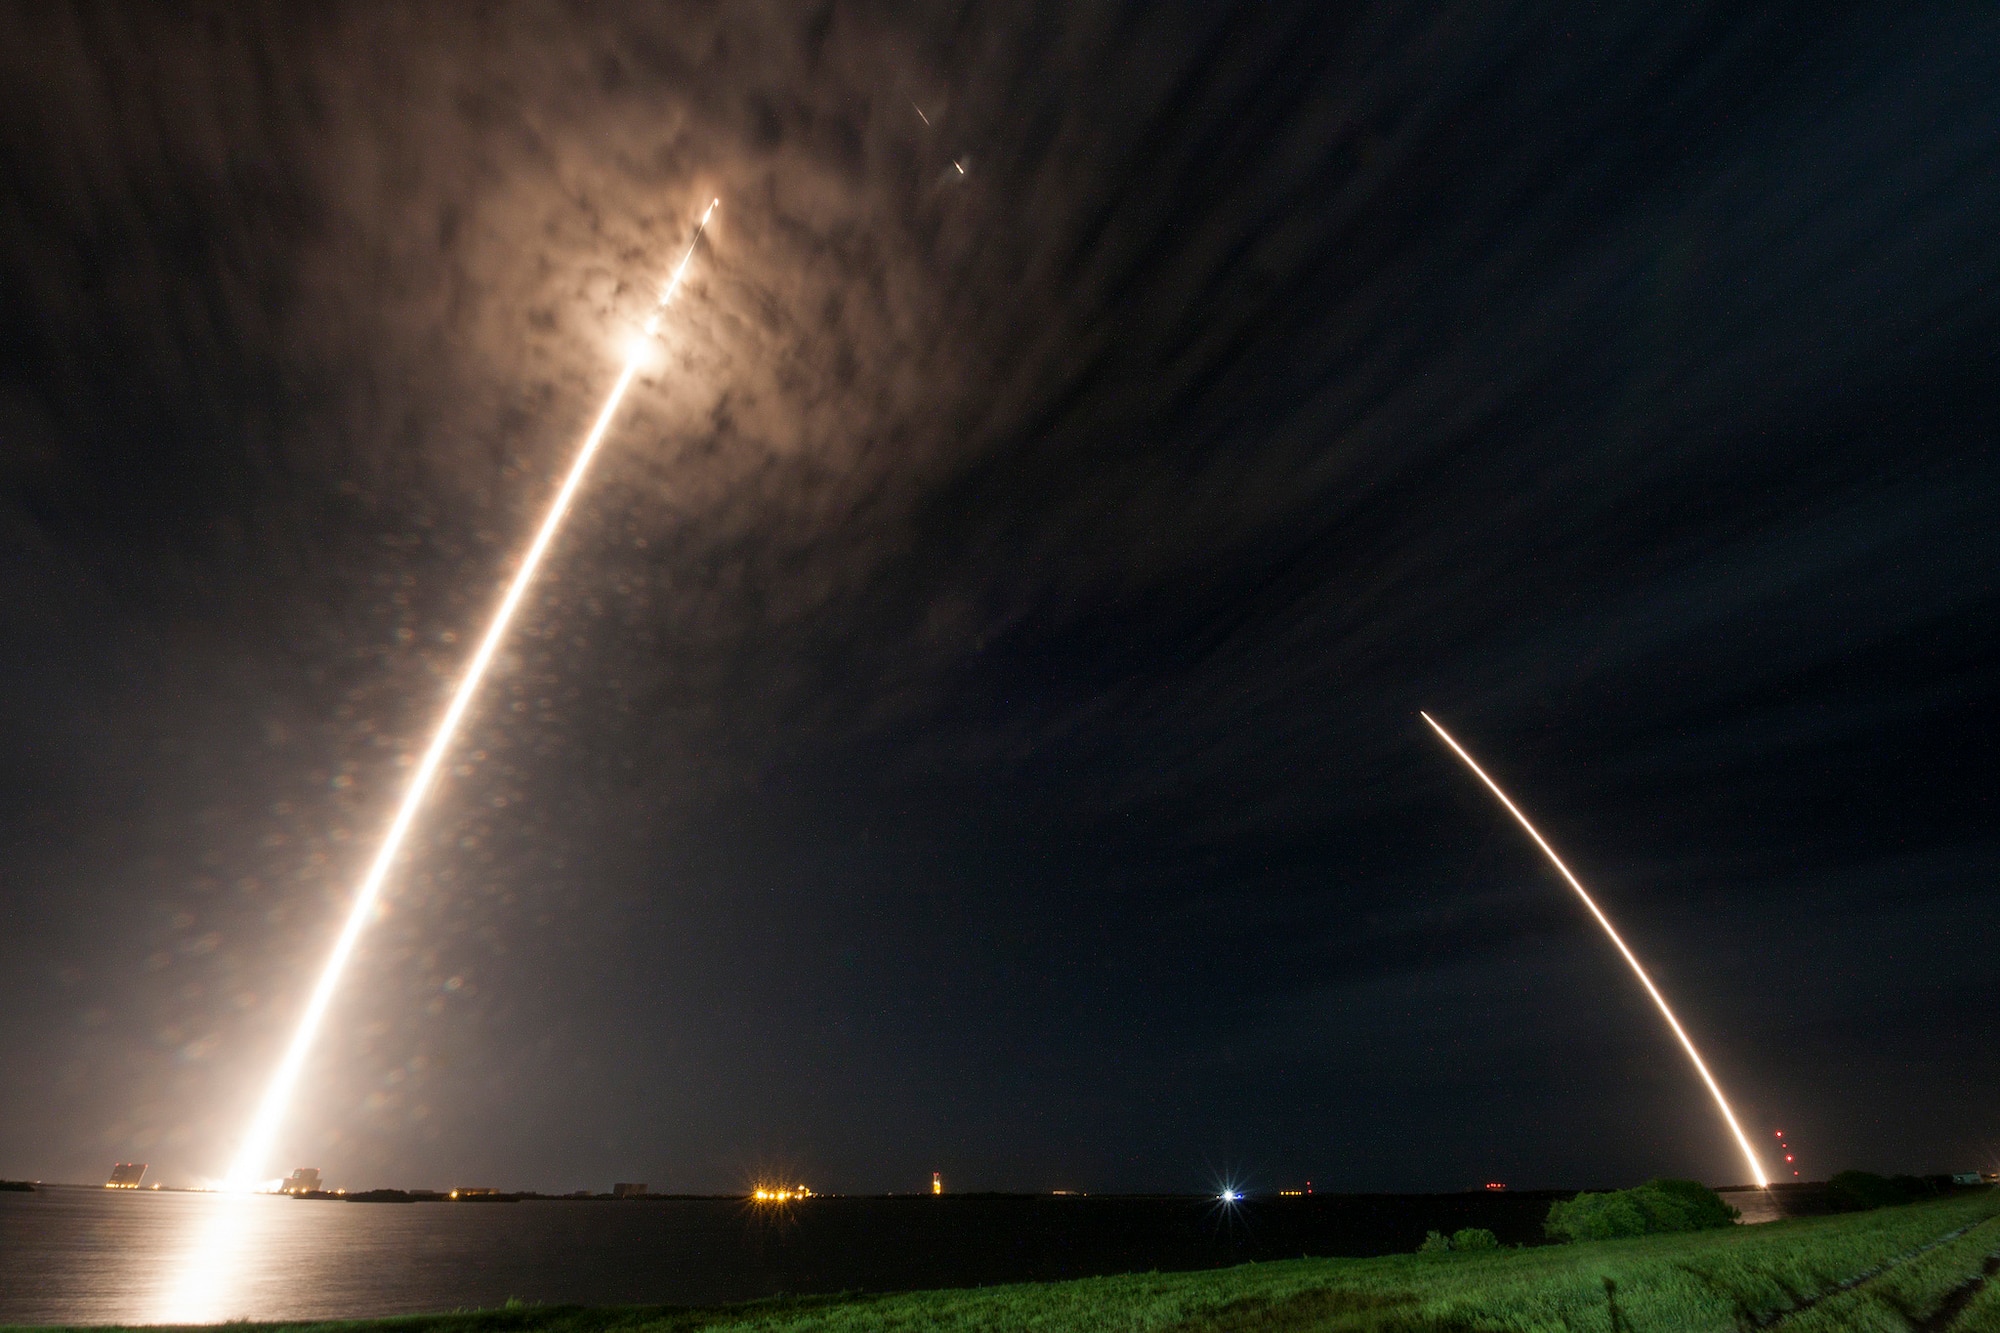 The 45th Space Wing supported SpaceX’s successful launch of a Falcon 9 Dragon spacecraft headed to the International Space Station from Space Launch Complex 40 here July 18, 2016, at 12:45 a.m. ET. At approximately eight minutes after the launch, SpaceX successfully landed the Falcon 9 first-stage booster at Landing Zone 1 on Cape Canaveral Air Force Station, Fla.This Falcon 9 Dragon launch was the 13th major launch operation for the Eastern Range this year, and marks the ninth contracted mission by SpaceX under NASA’s Commercial Resupply Services contract. (Courtesy photo by SpaceX)